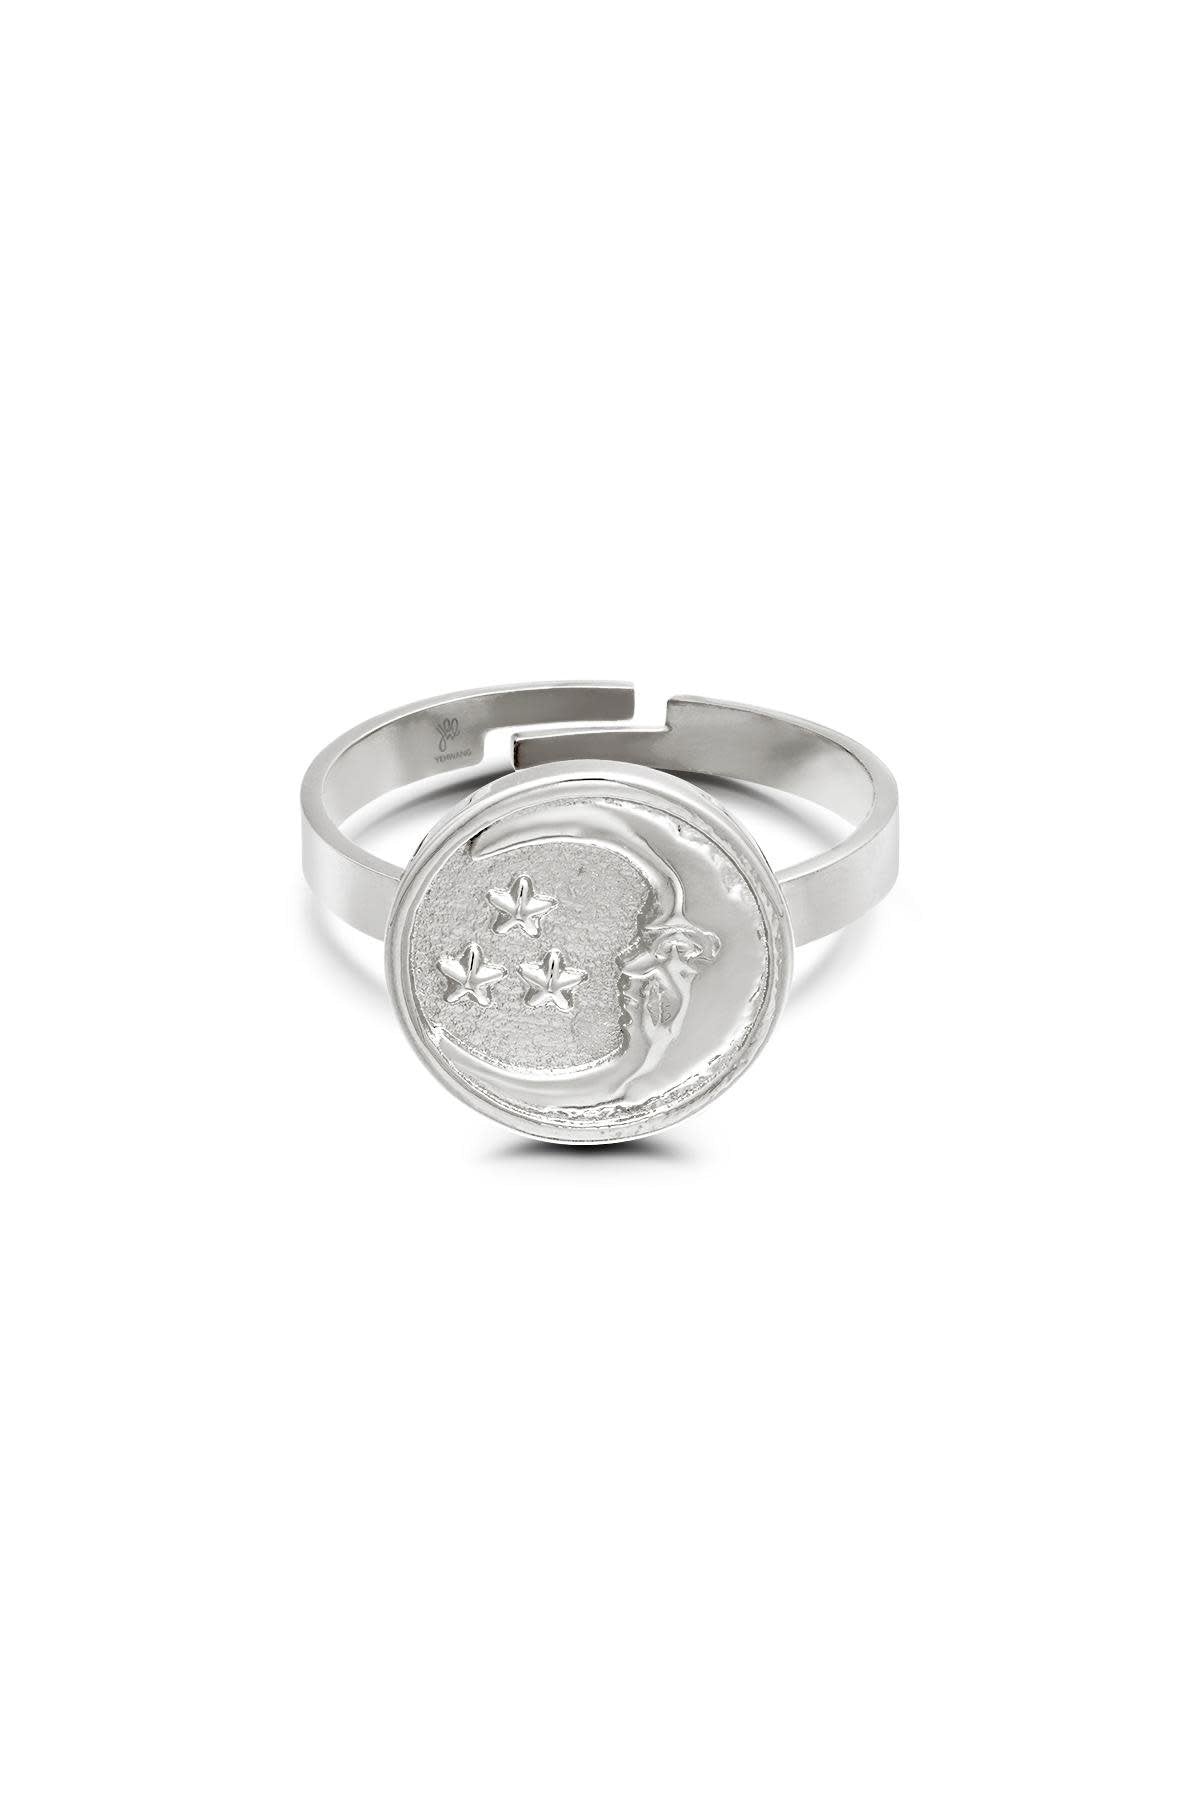 Stainless steel zegel ring moon and stars silver